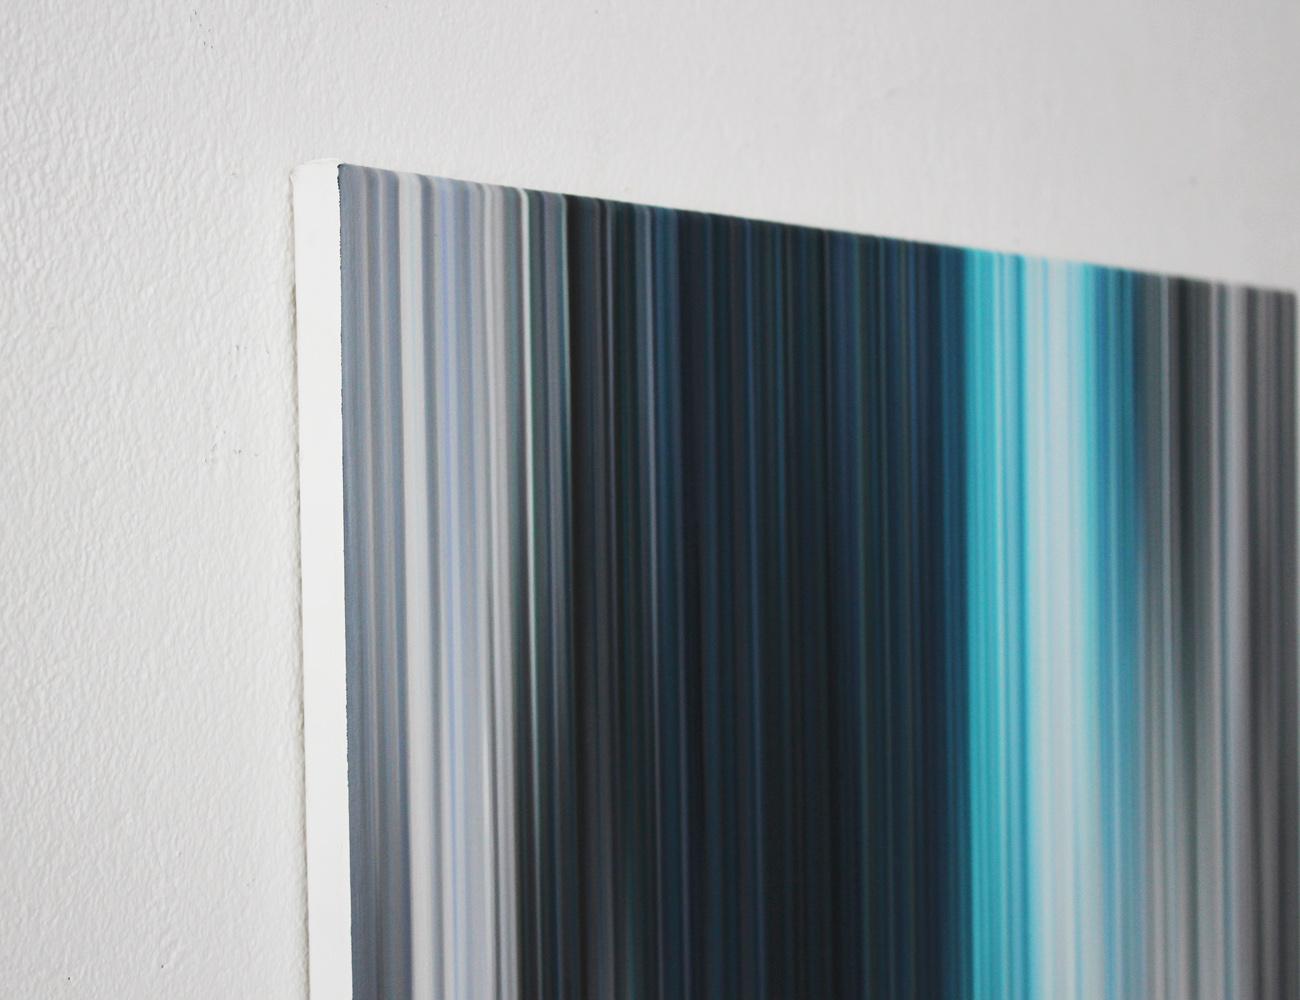 Light'n'Lines No.01 by Doris Marten - Contemporary abstract painting, blue lines For Sale 1